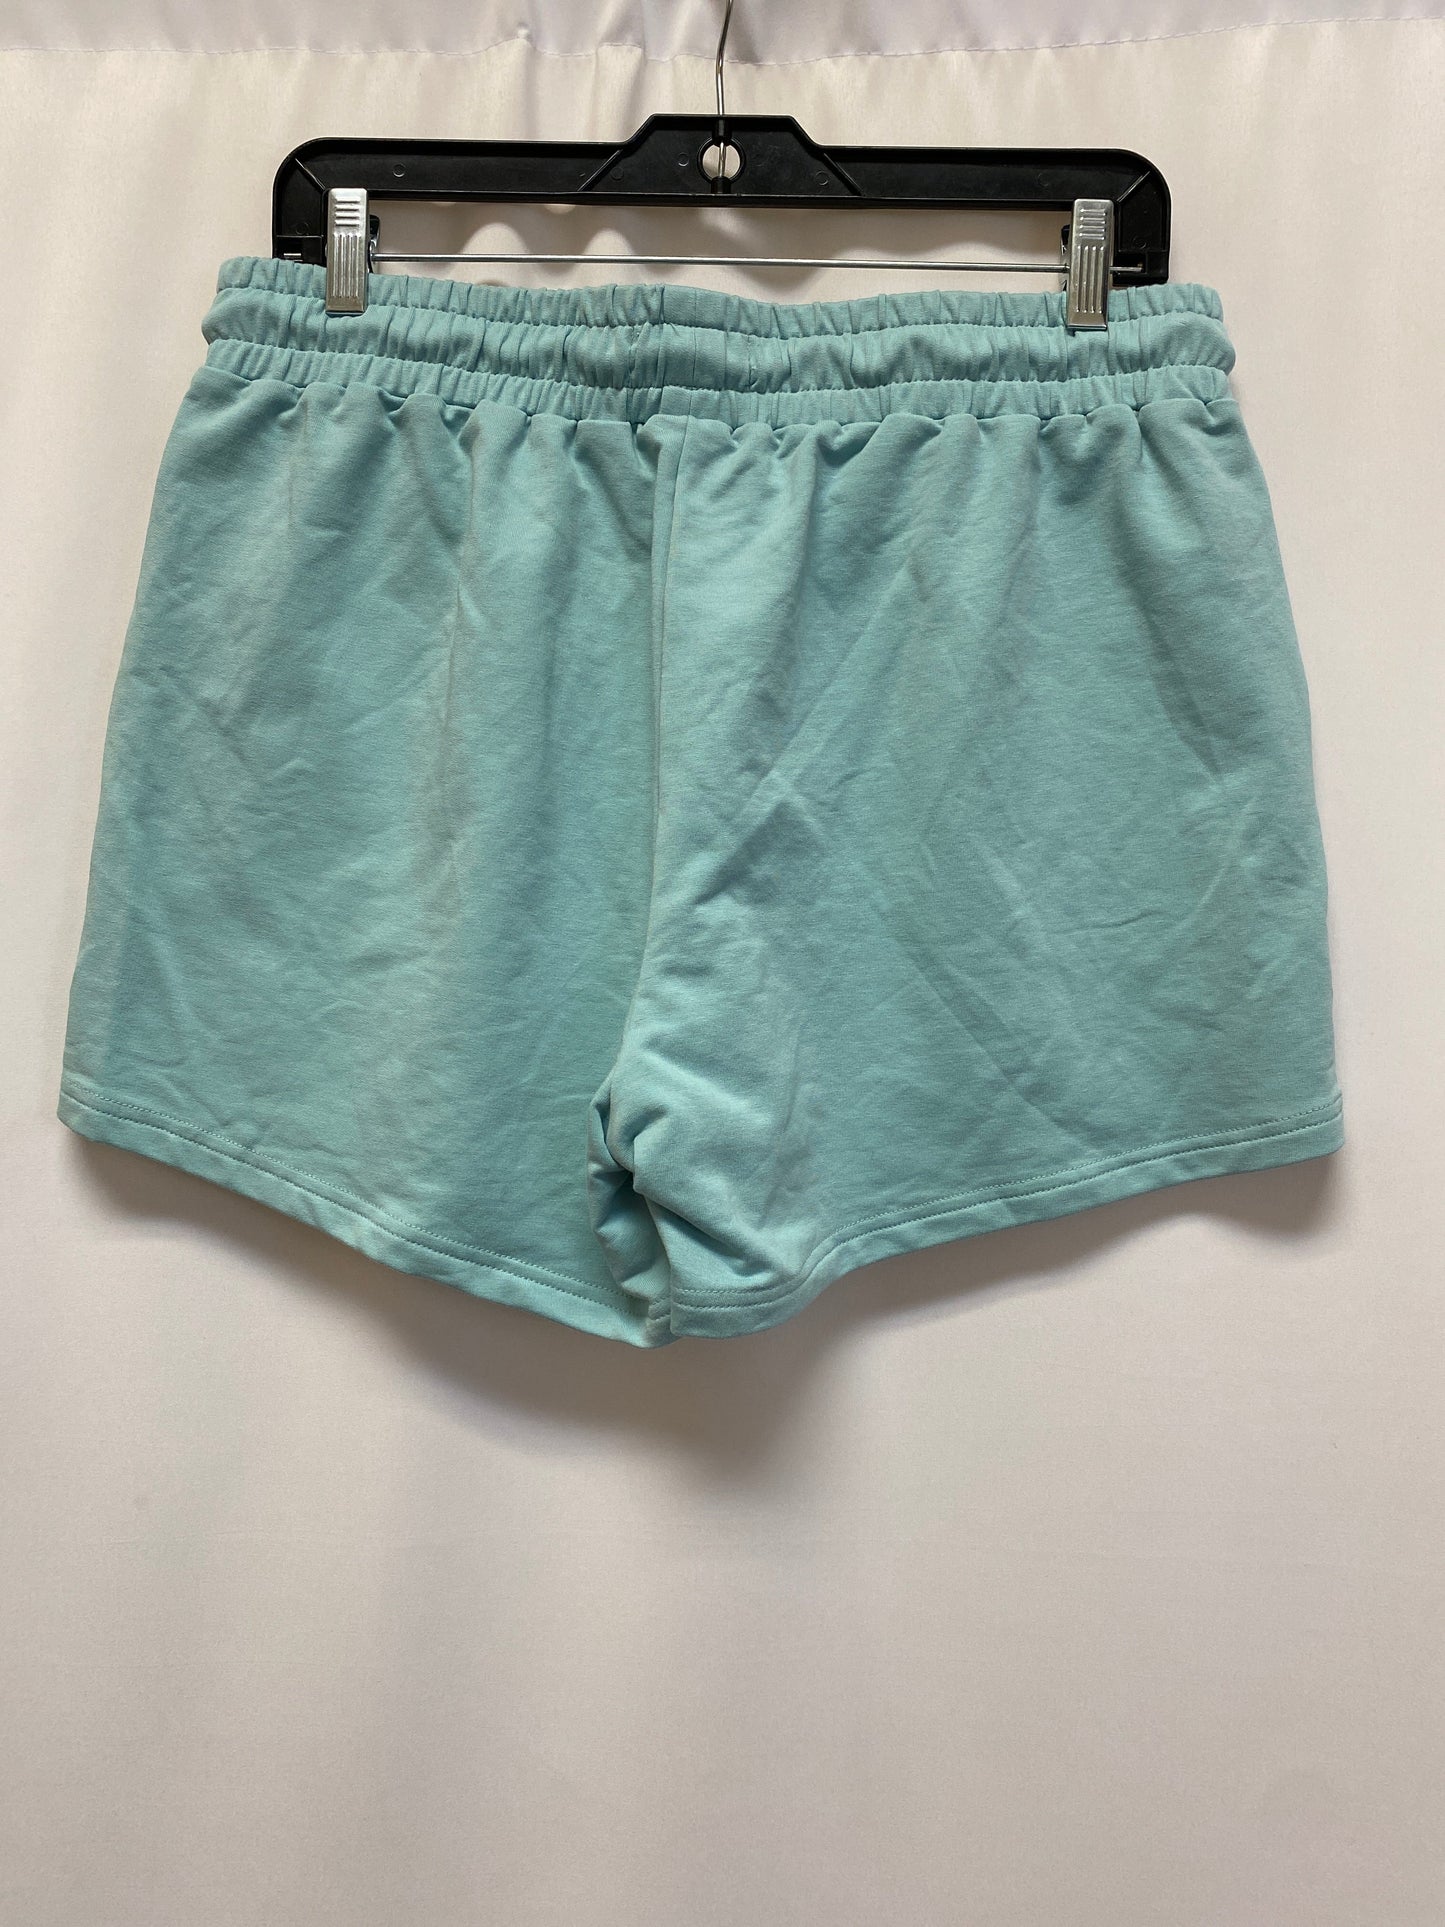 Shorts By Clothes Mentor  Size: Xl